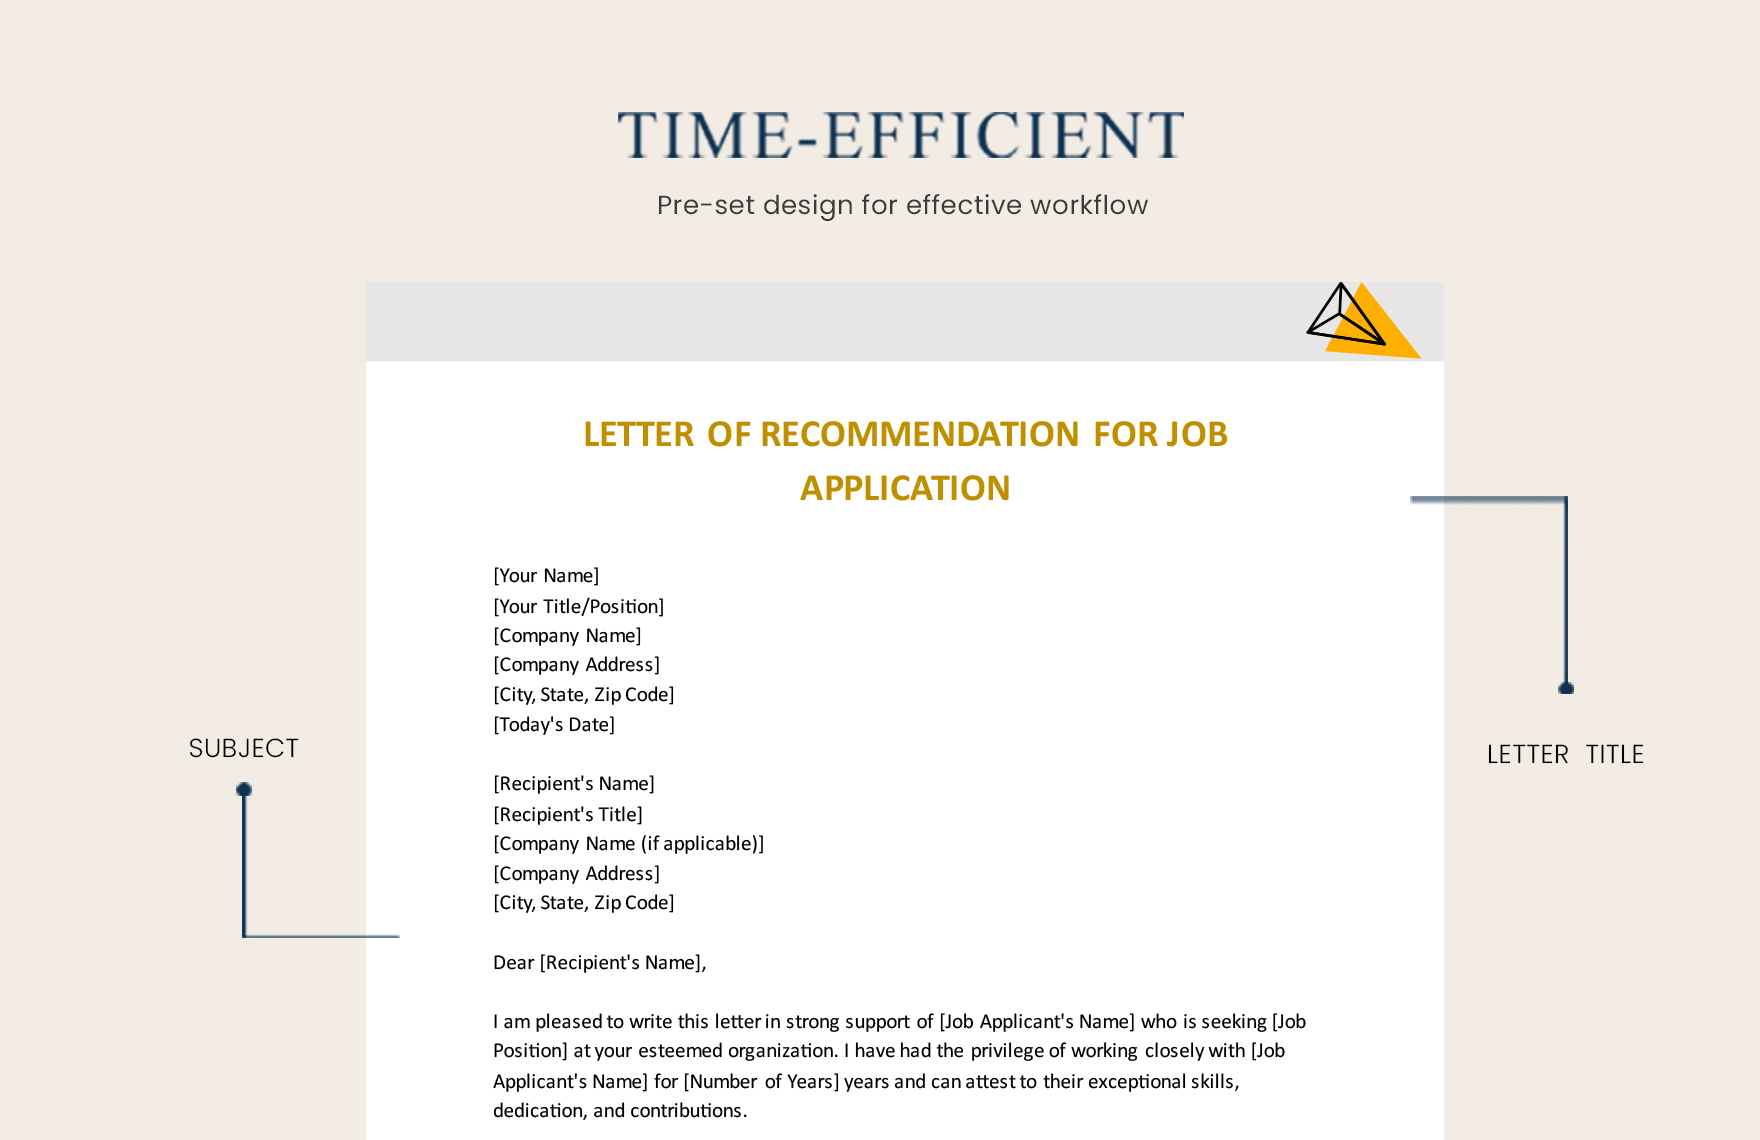 Letter Of Recommendation For Job Application